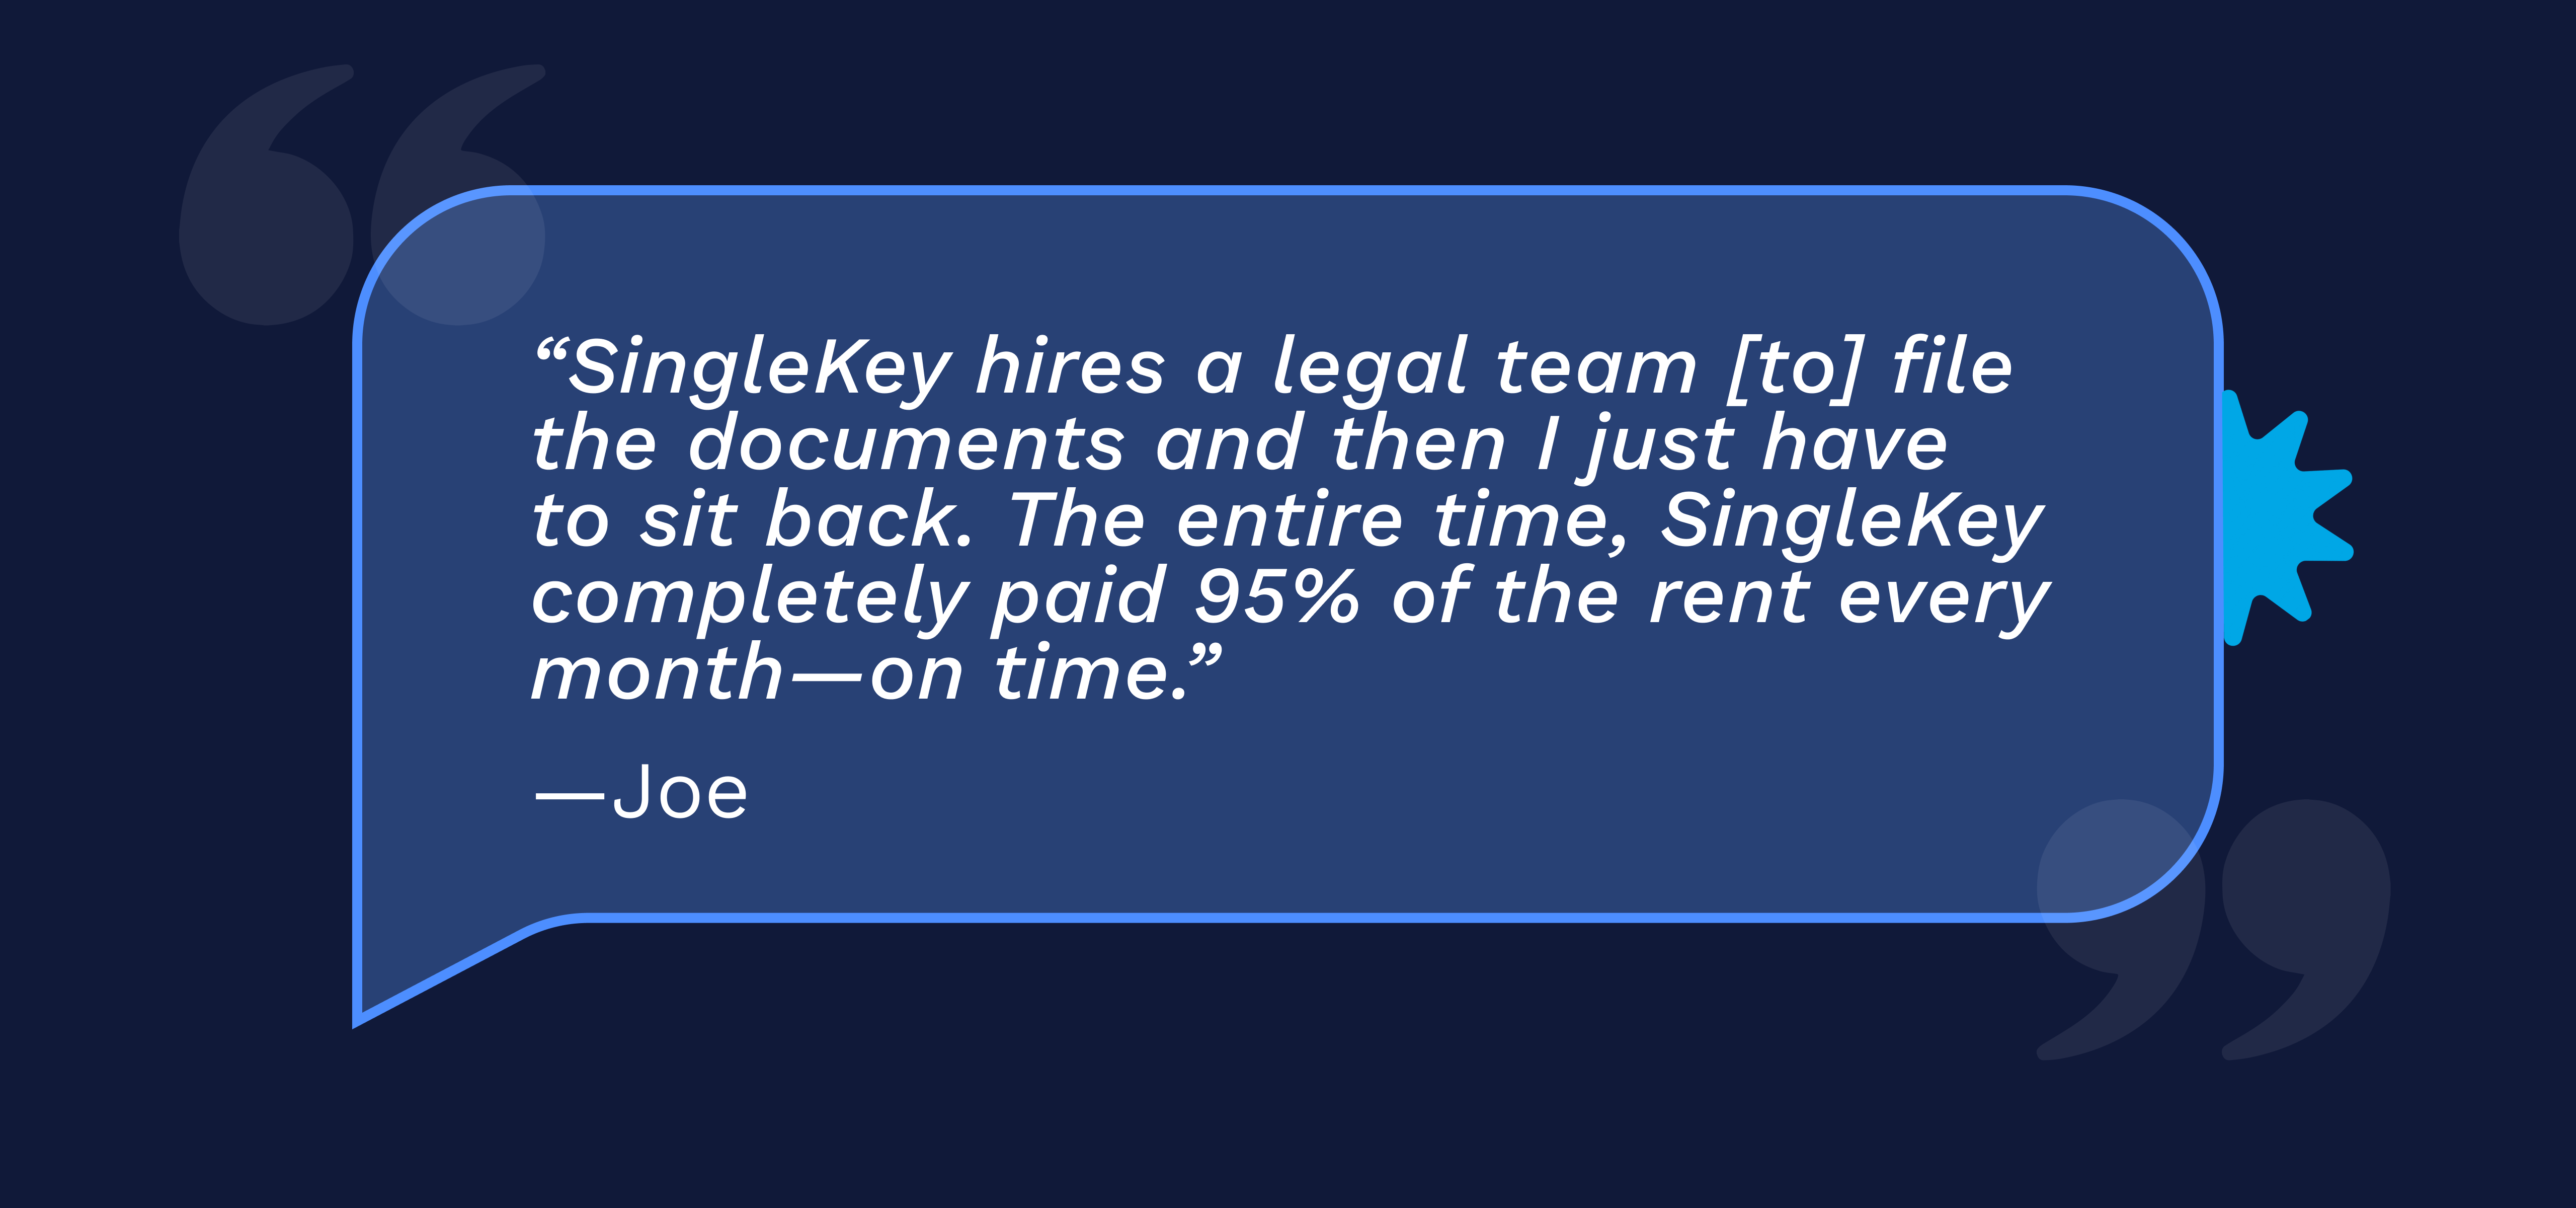 “SingleKey hires a legal team [to] file the documents and then I just have to sit back. The entire time, SingleKey completely paid 95% of the rent every month—on time.” -Joe